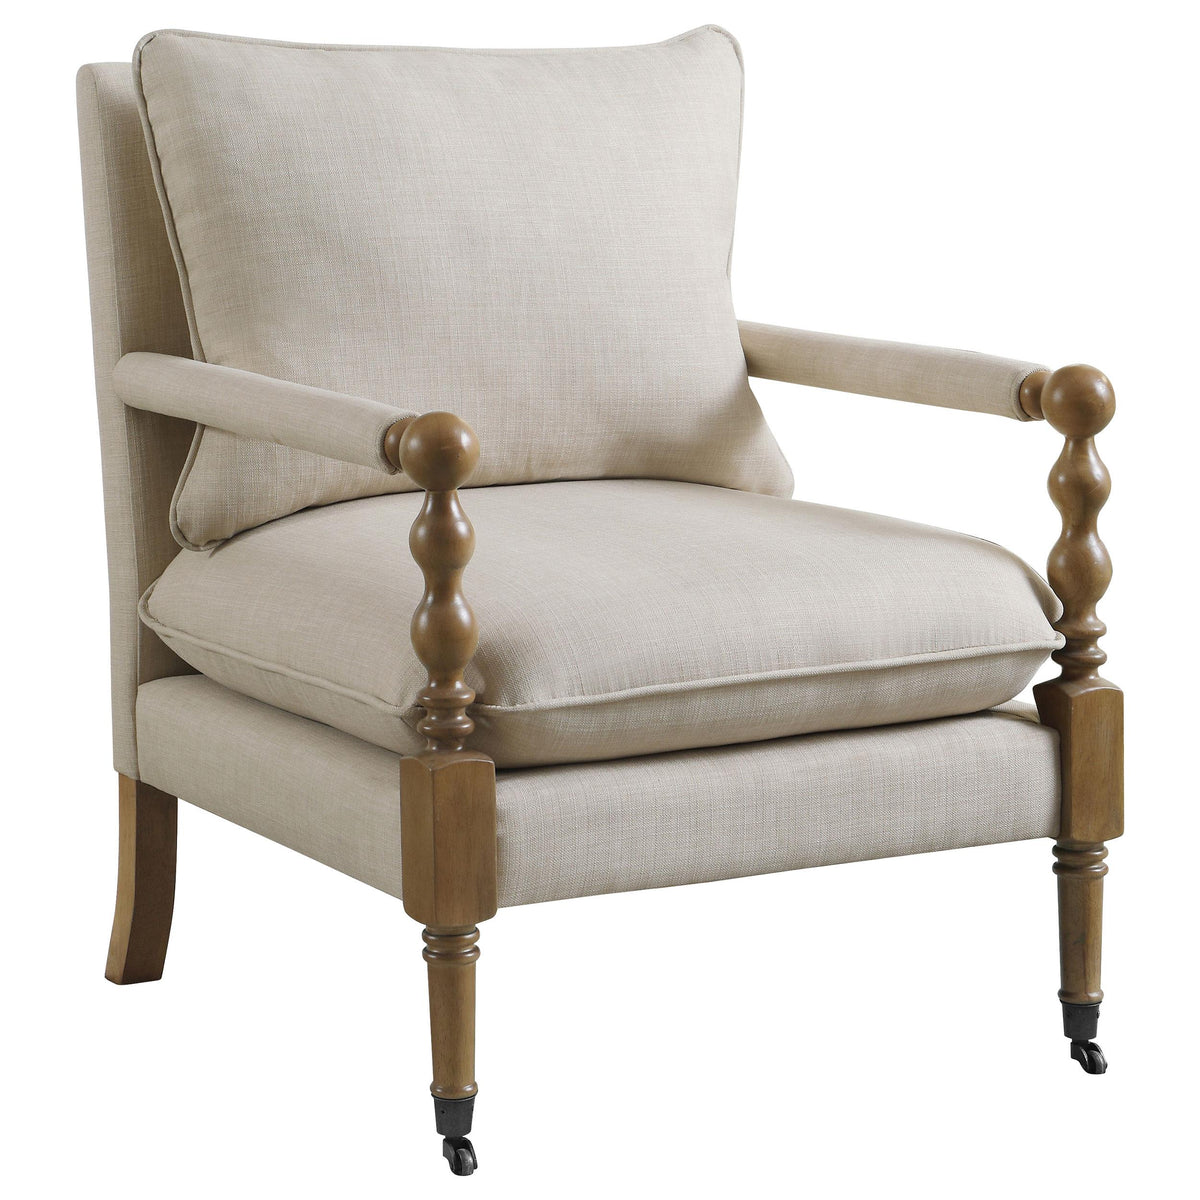 Dempsy Upholstered Accent Chair with Casters Beige Dempsy Upholstered Accent Chair with Casters Beige Half Price Furniture